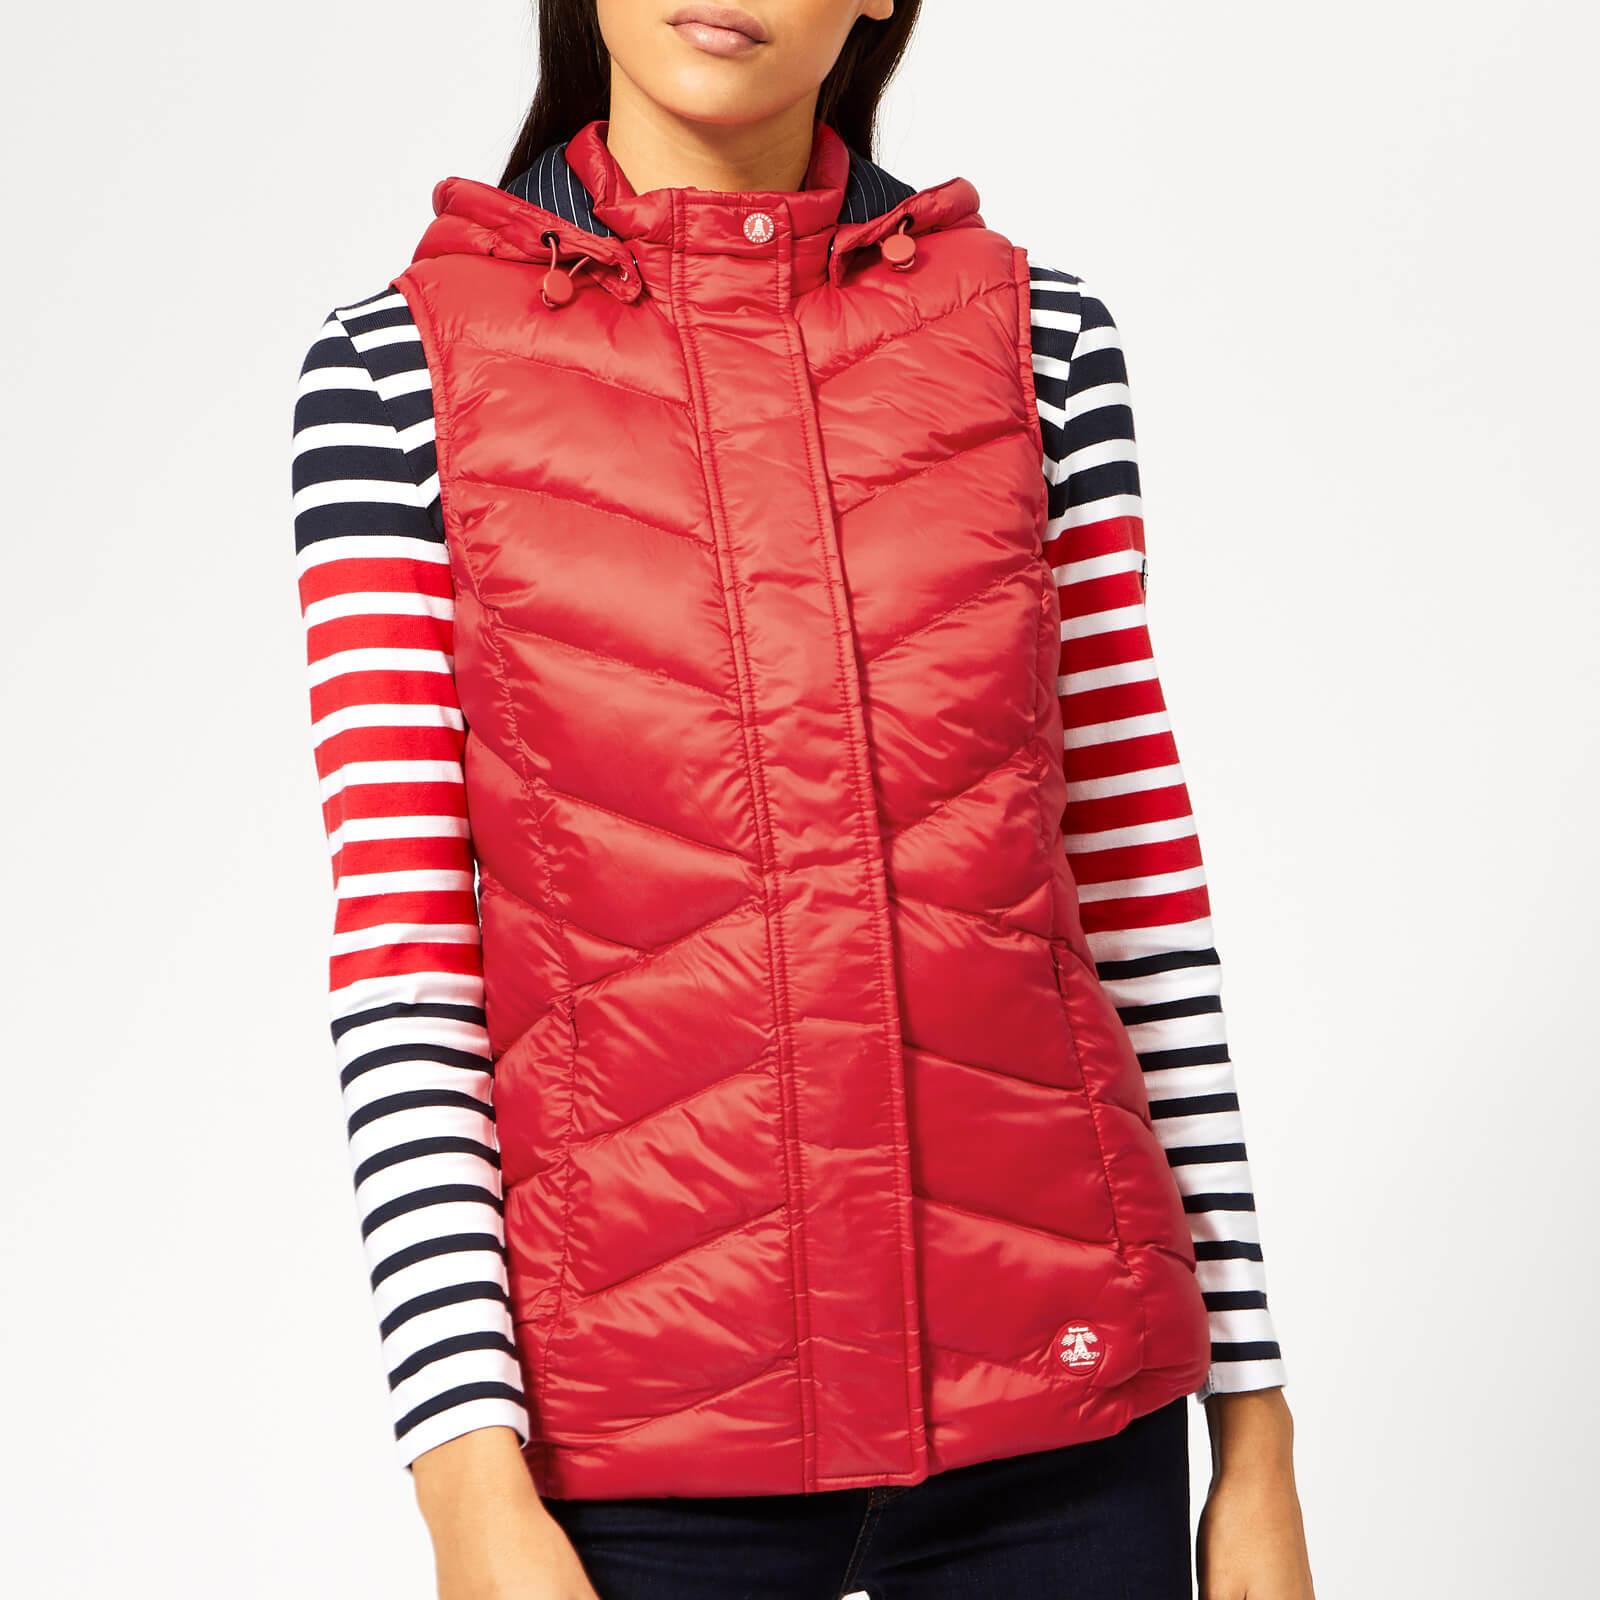 Barbour Seaward Gilet Store, 57% OFF | www.outdoorwritersofohio.org